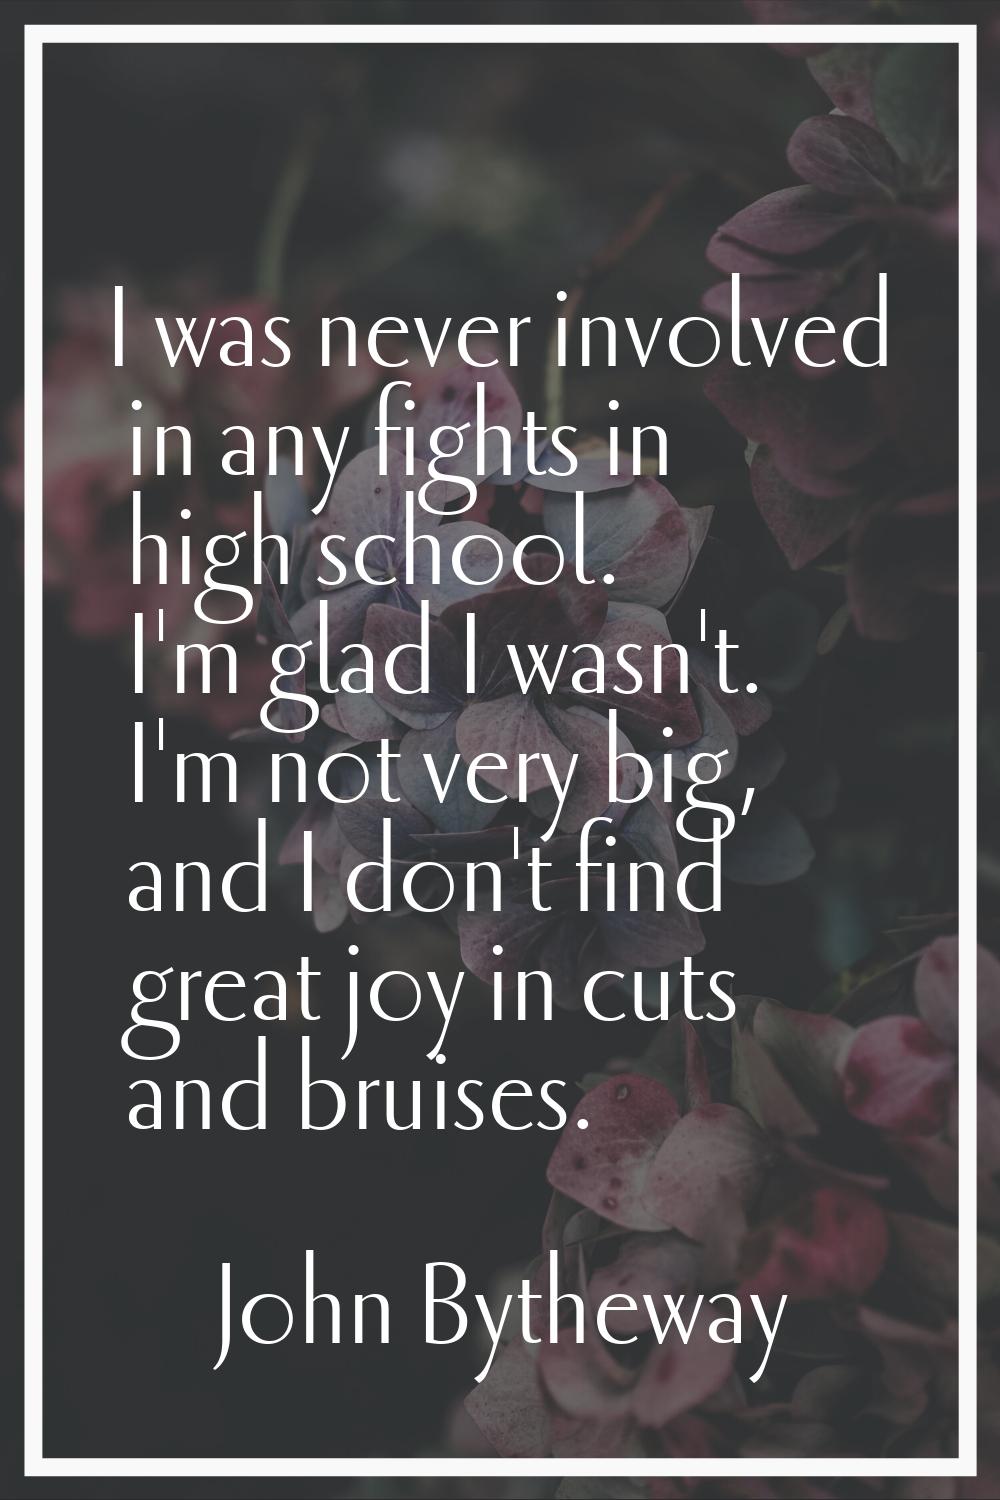 I was never involved in any fights in high school. I'm glad I wasn't. I'm not very big, and I don't